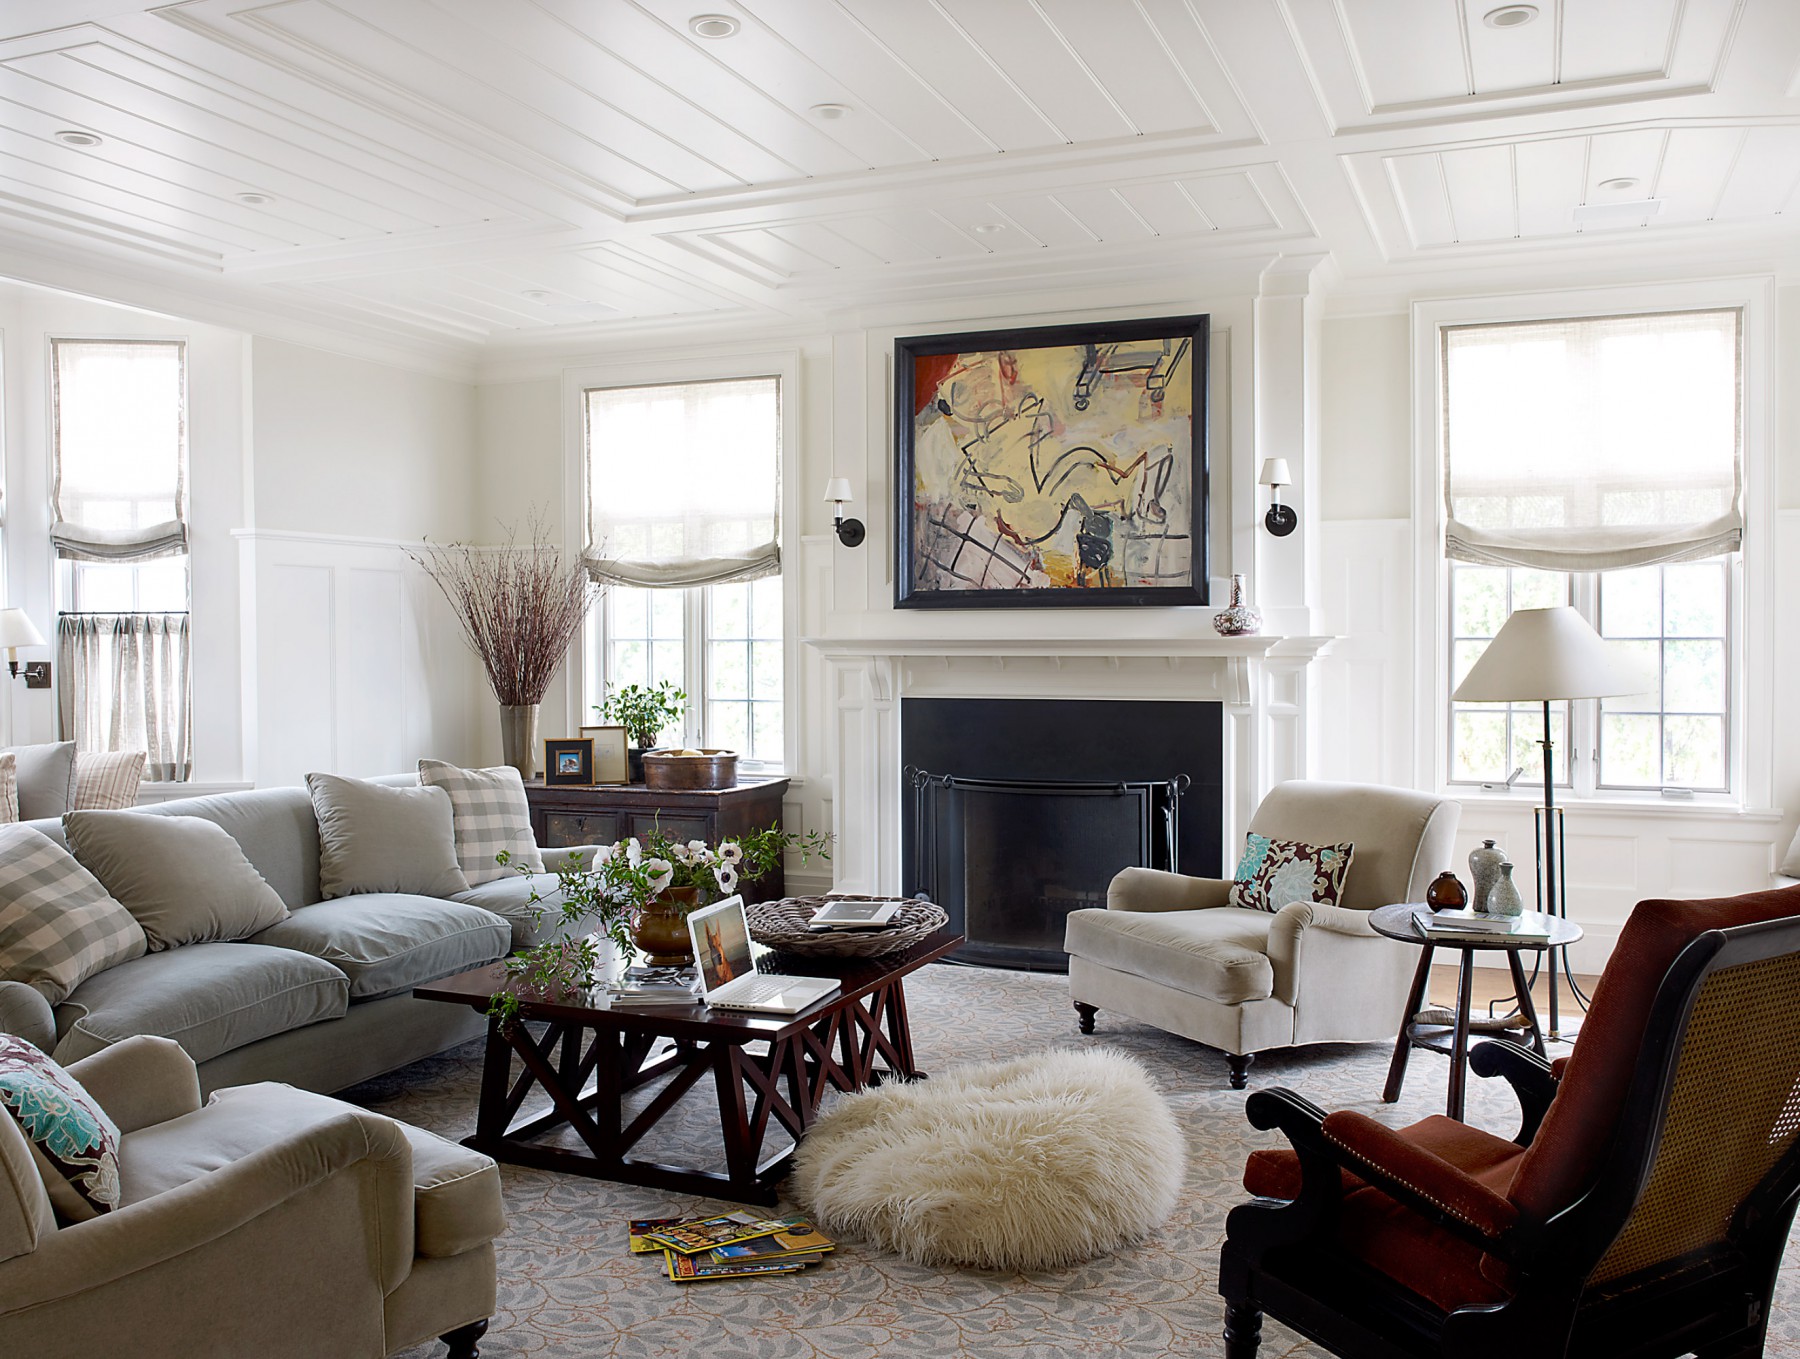 Living room with fire place and custom designed paneling and molding